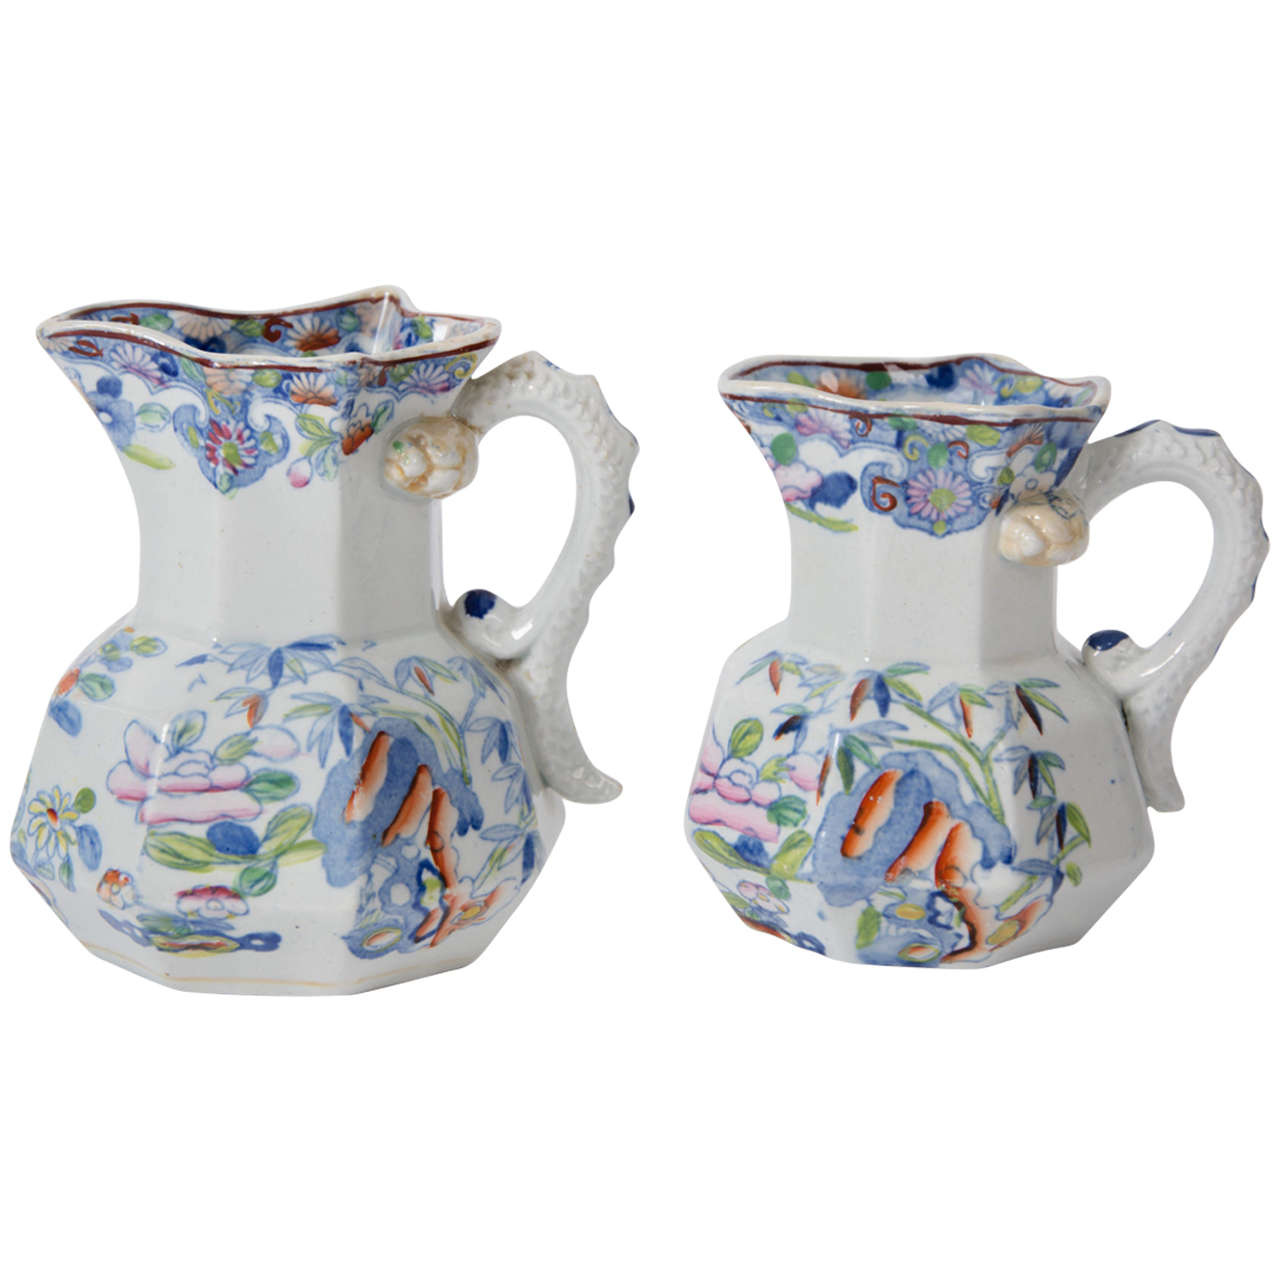 Very Early Pair of Mason's Ironstone Jugs or Pitchers Bamboo Pattern, Ca 1815